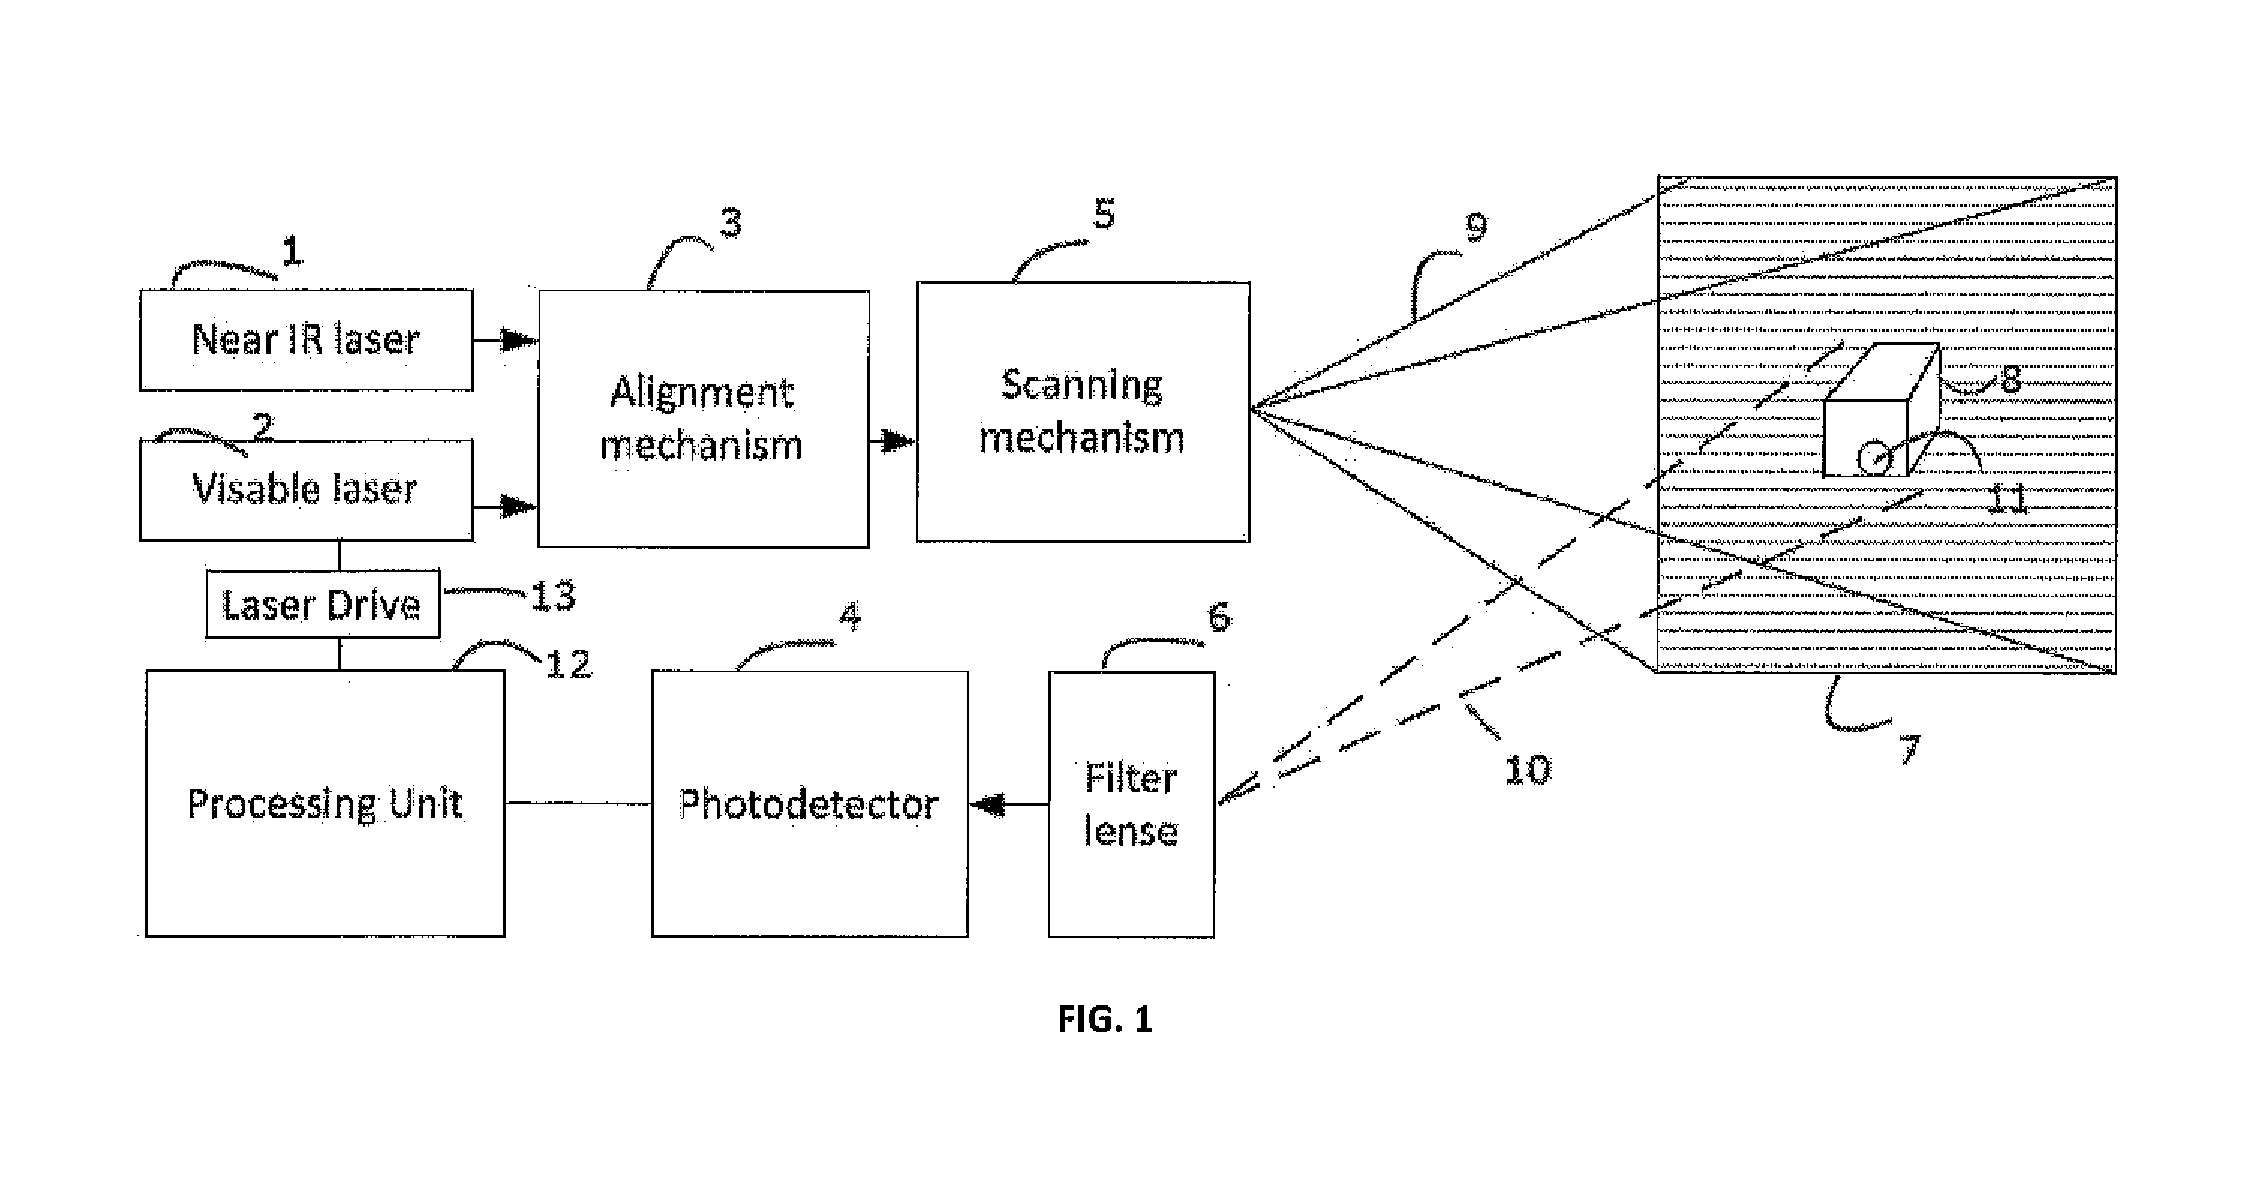 System and Method for Multi-Color Laser Imaging and Ablation of Cancer Cells Using Fluorescence